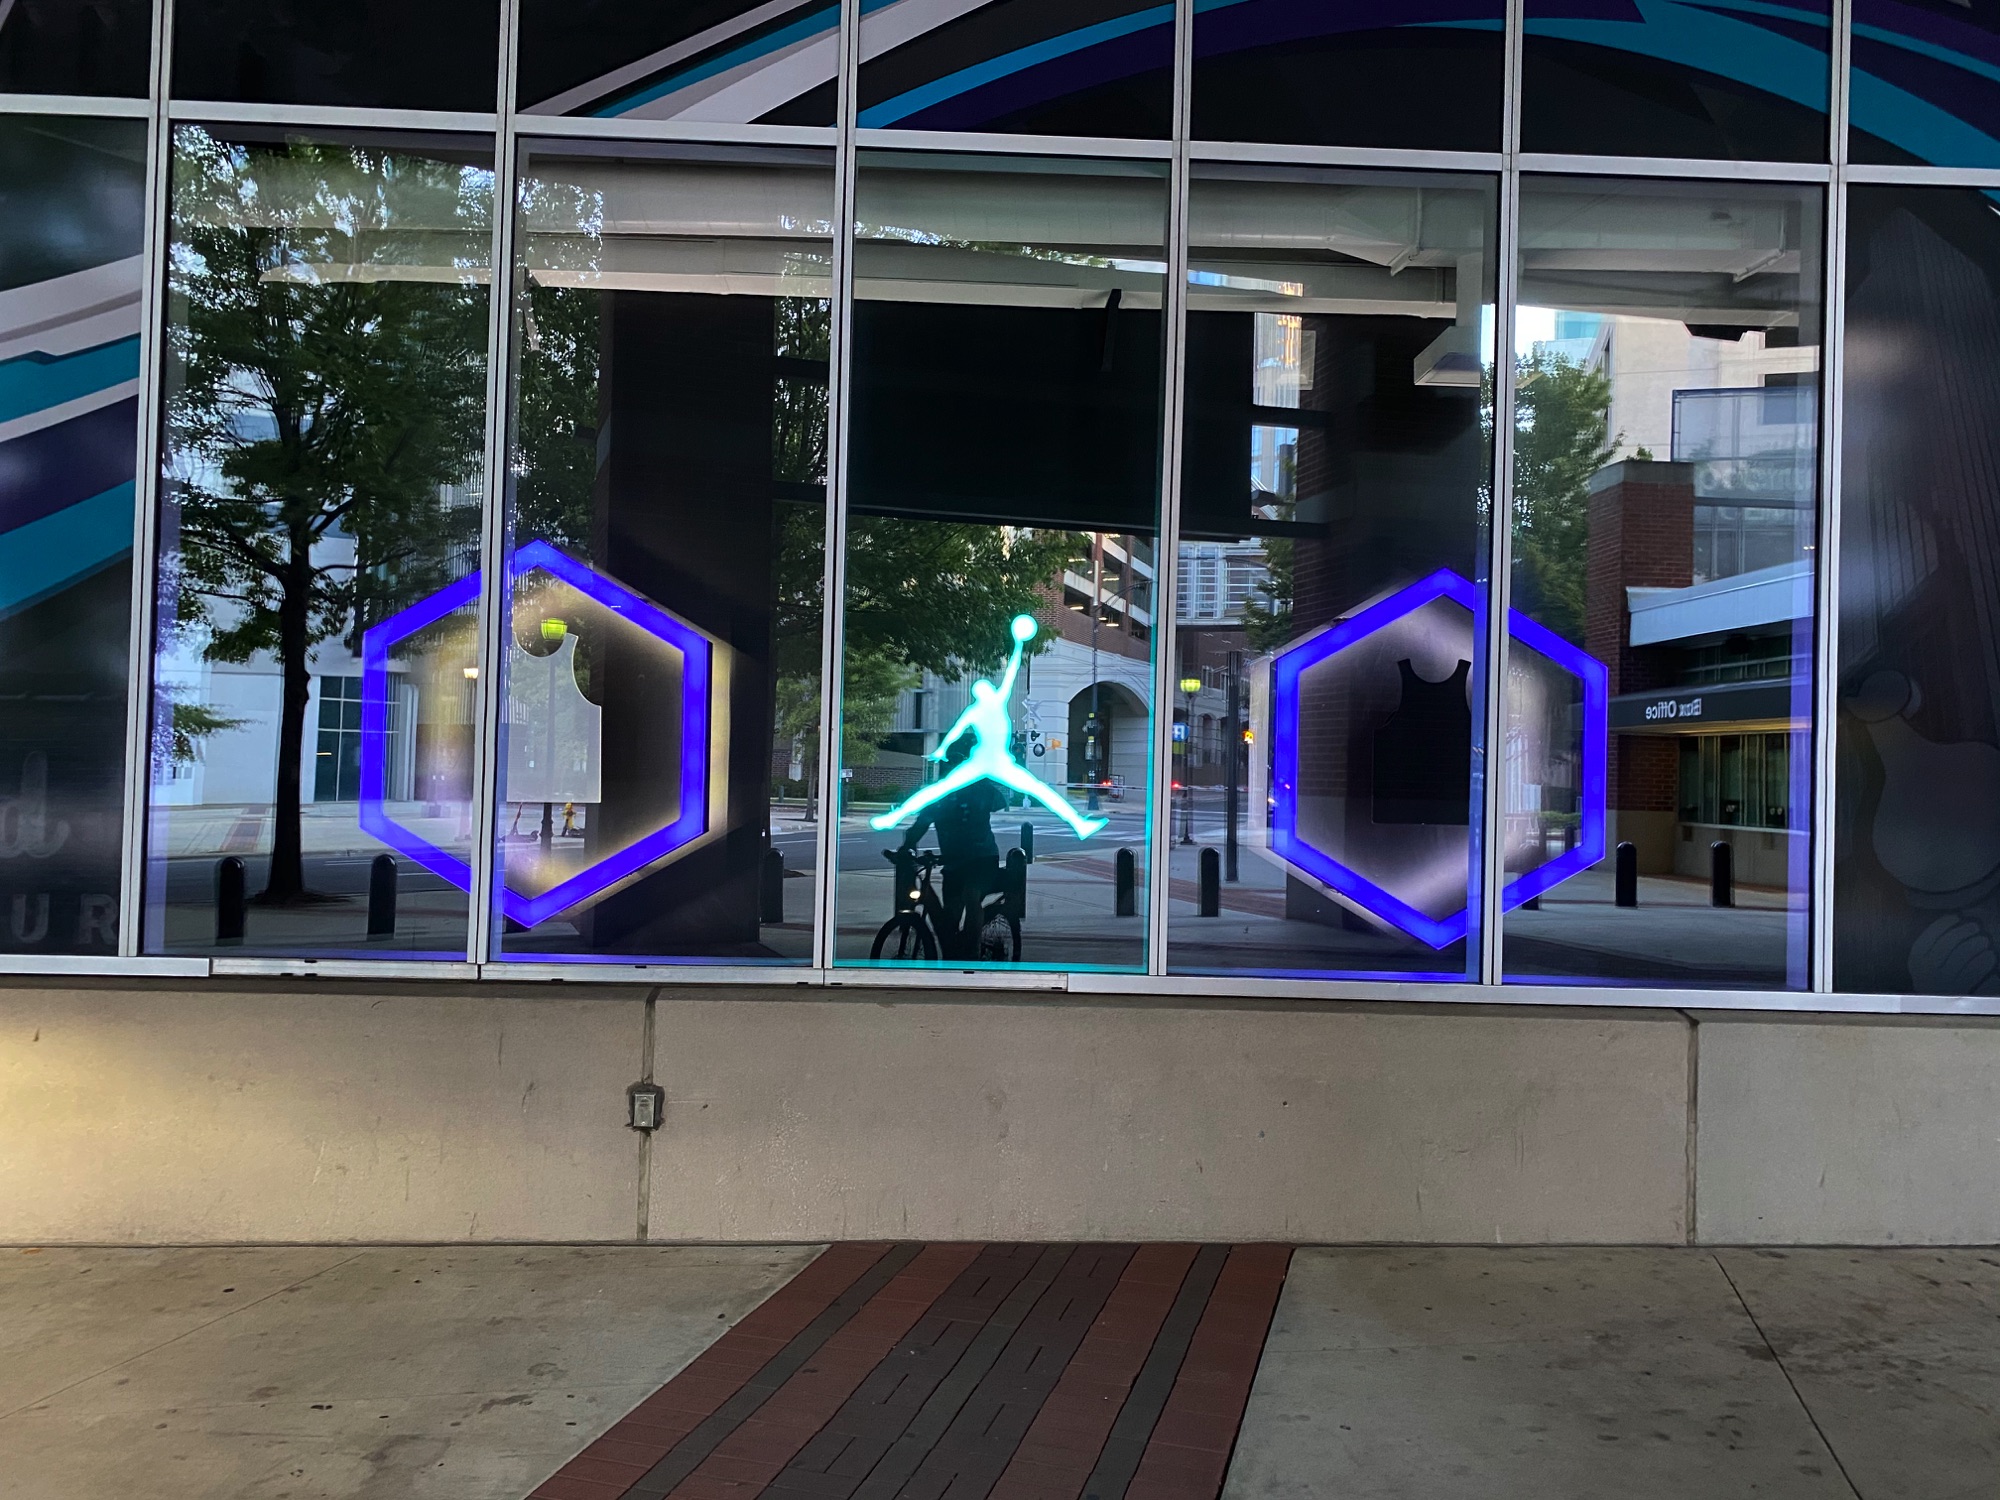 Electric Bicycles in Charlotte NC, Spectrum Center